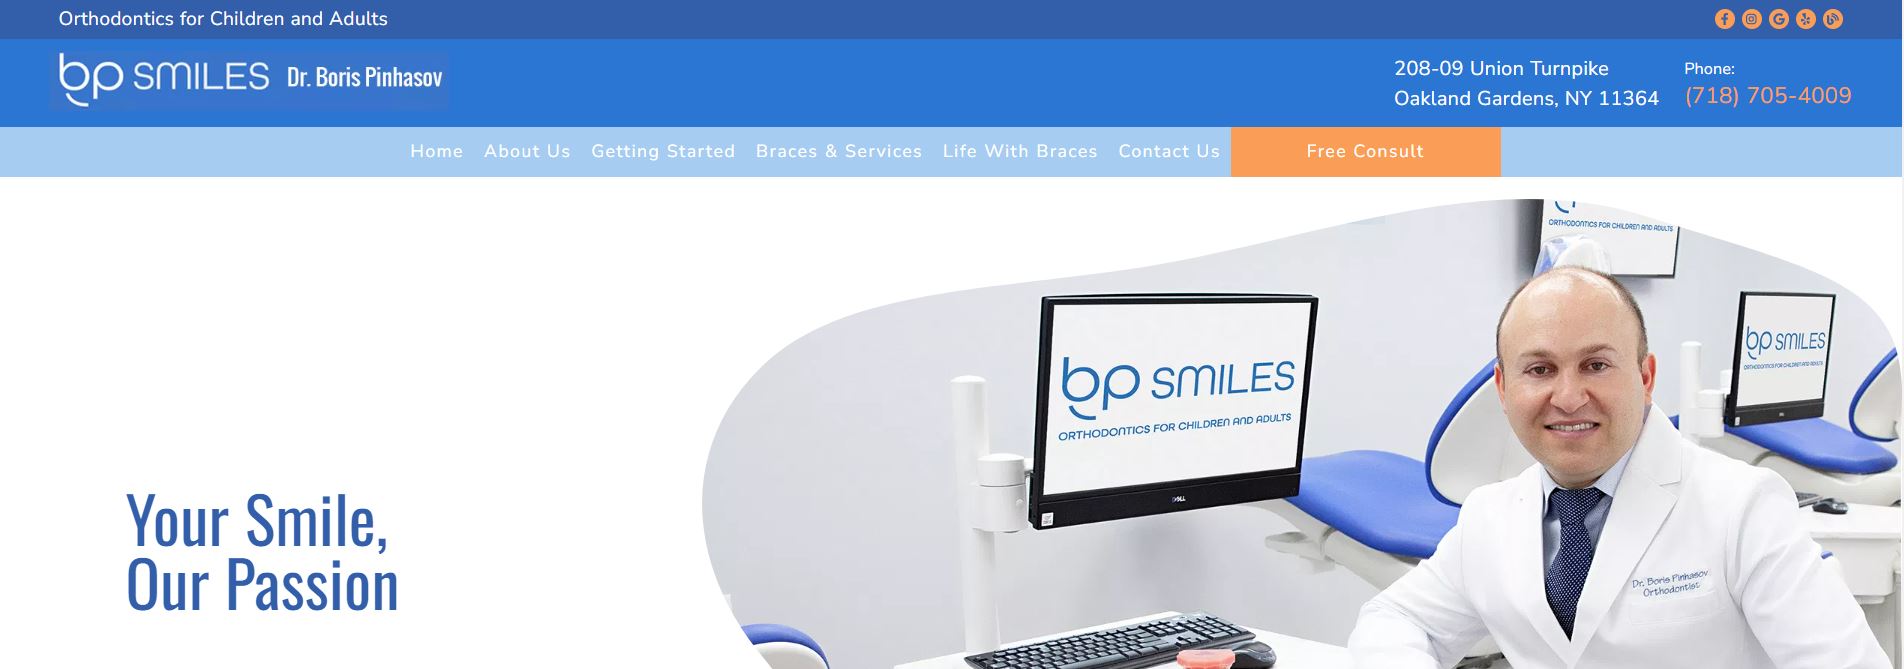 The image is a screenshot of a website with a prominent banner featuring a smiling person, presumably a dental professional, against a blue background with white text. Below the banner, there s a section showing a dental office interior with equipment and a receptionist.